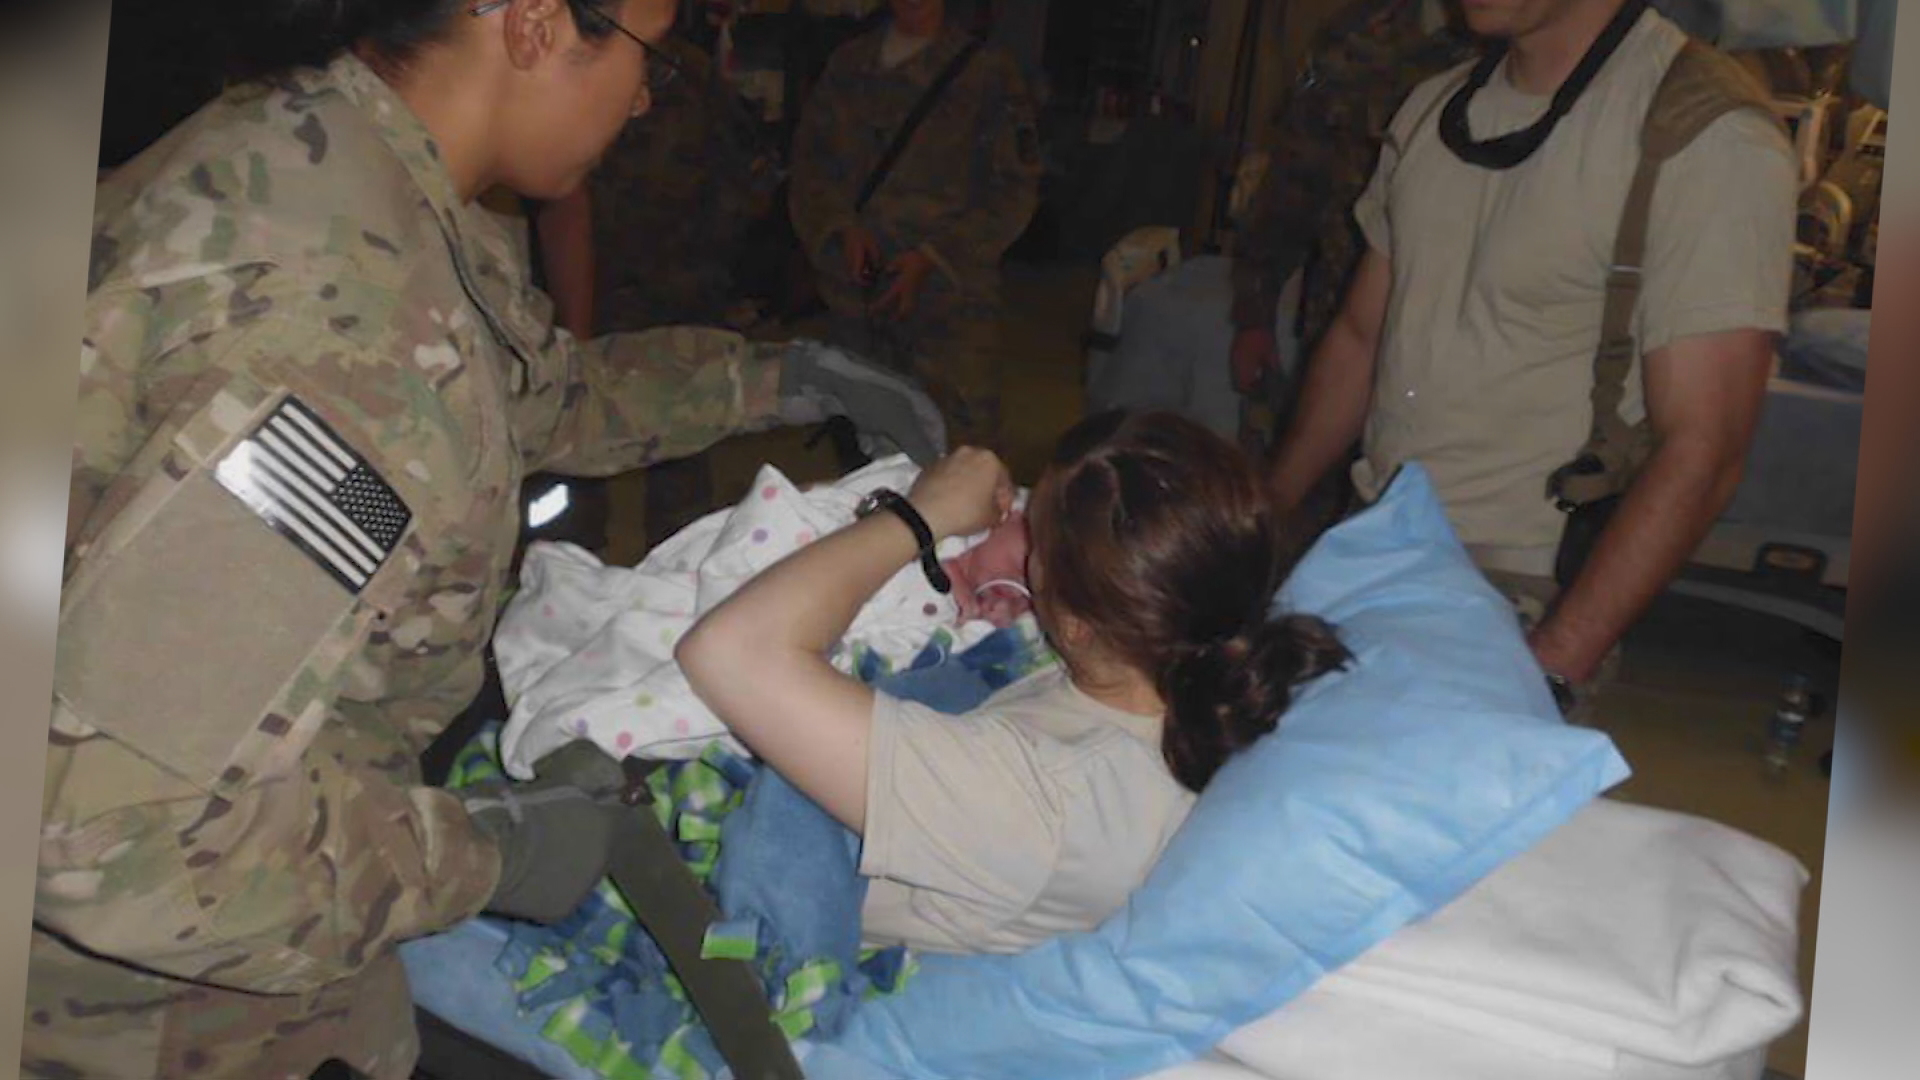 A soldier who unexpectedly gave birth to a baby in combat is unsure how her pregnancy was missed and what the future looks like for her son. (2017 investigation)